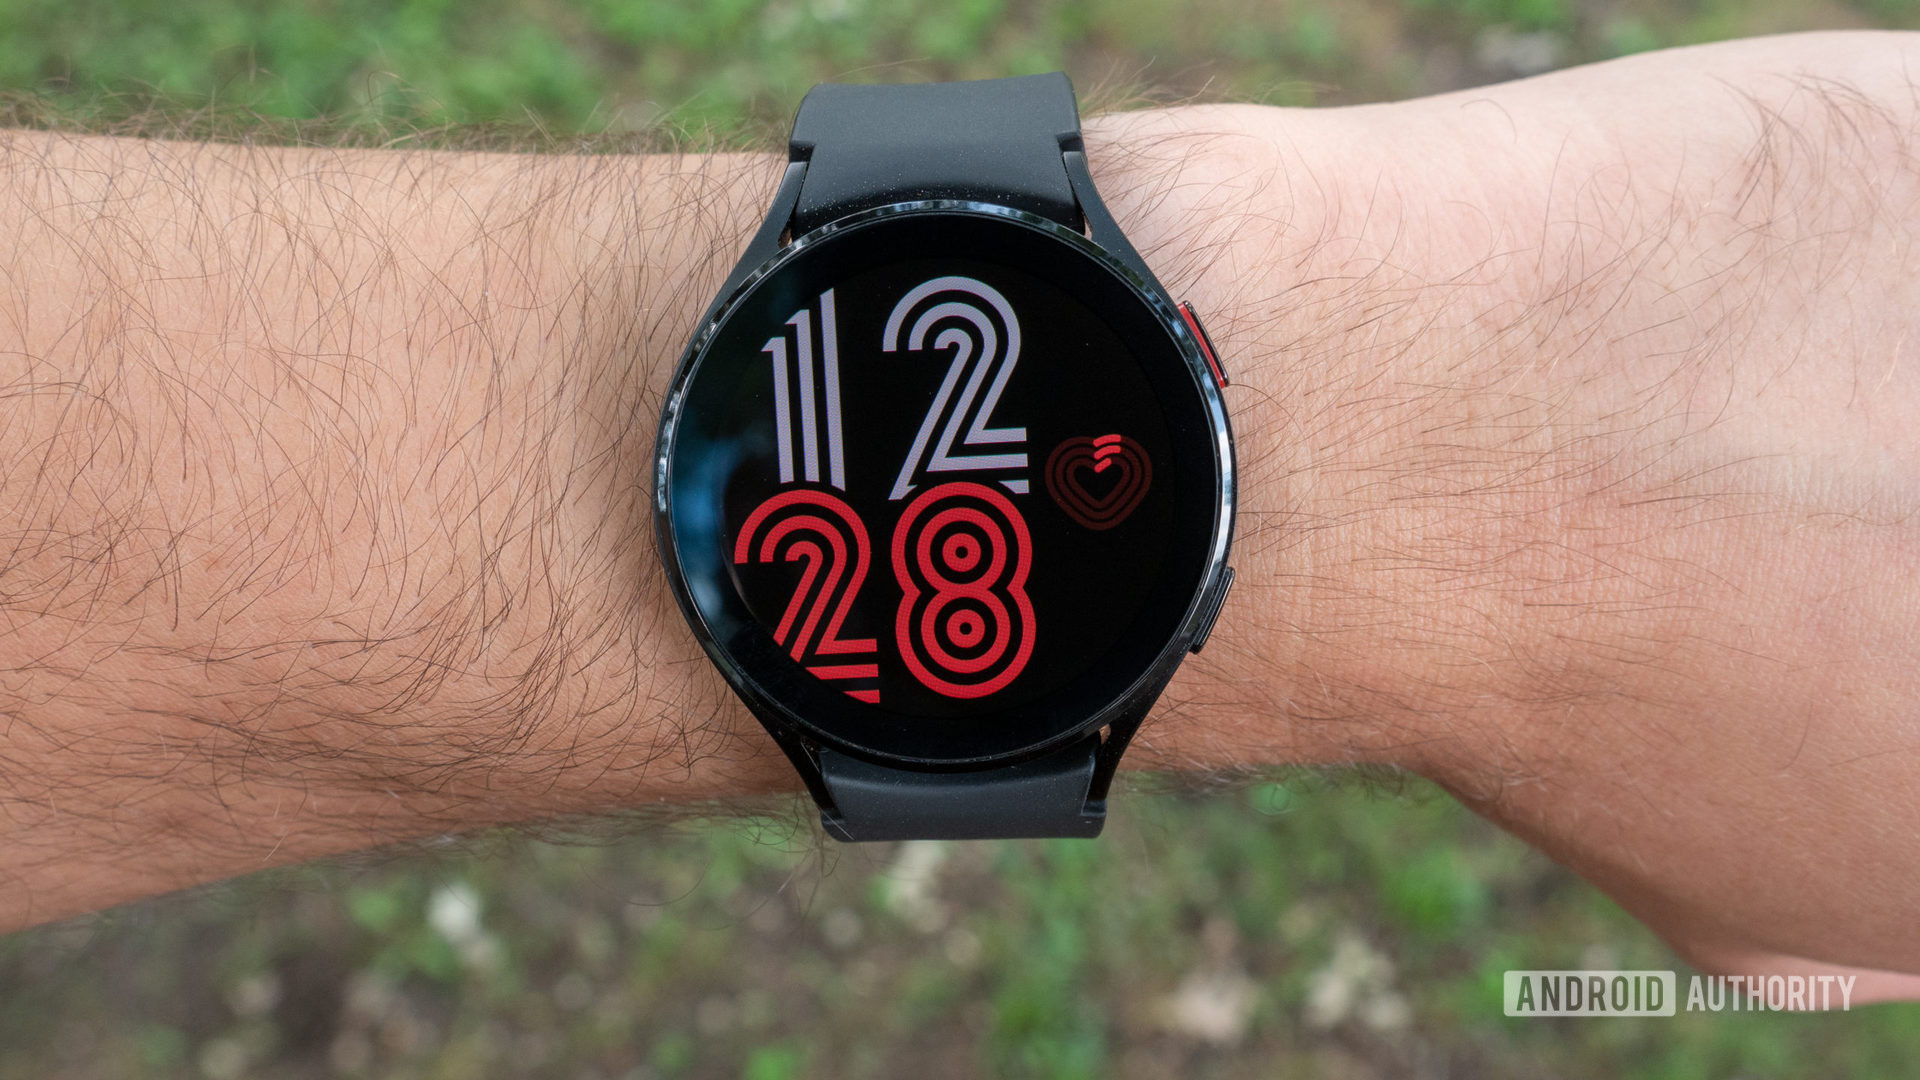 The samsung galaxy watch 4 on a wrist showing the watch face